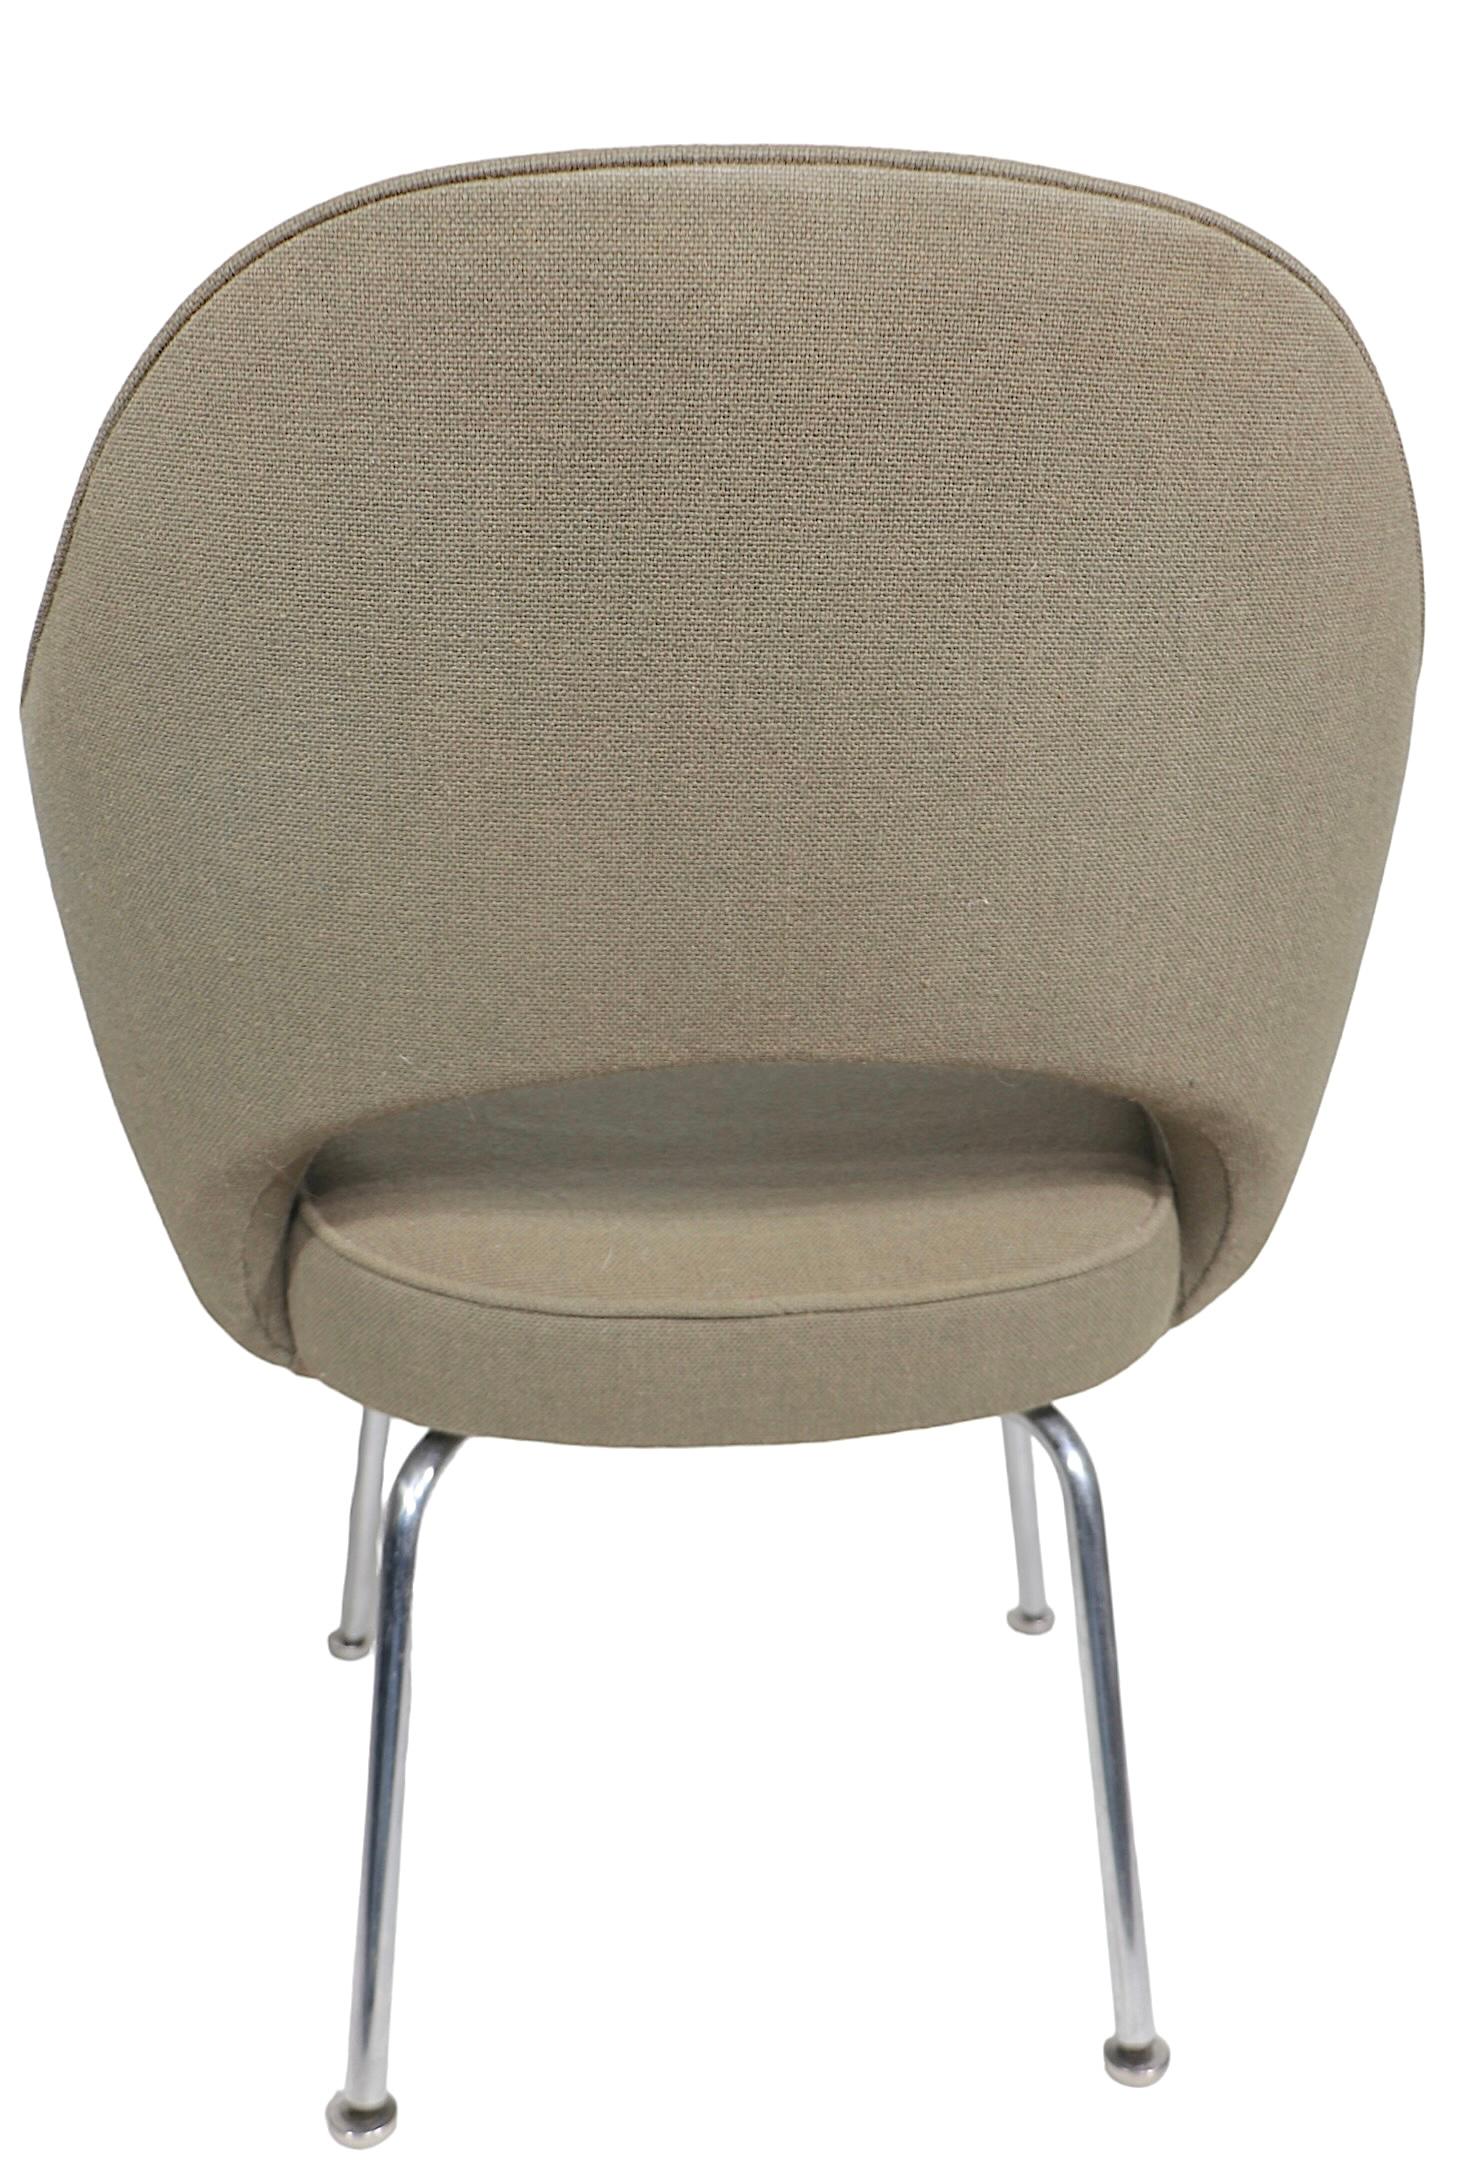 Pr. Vintage Saarinen for Knoll Executive Chairs c. 1960/70's In Good Condition For Sale In New York, NY